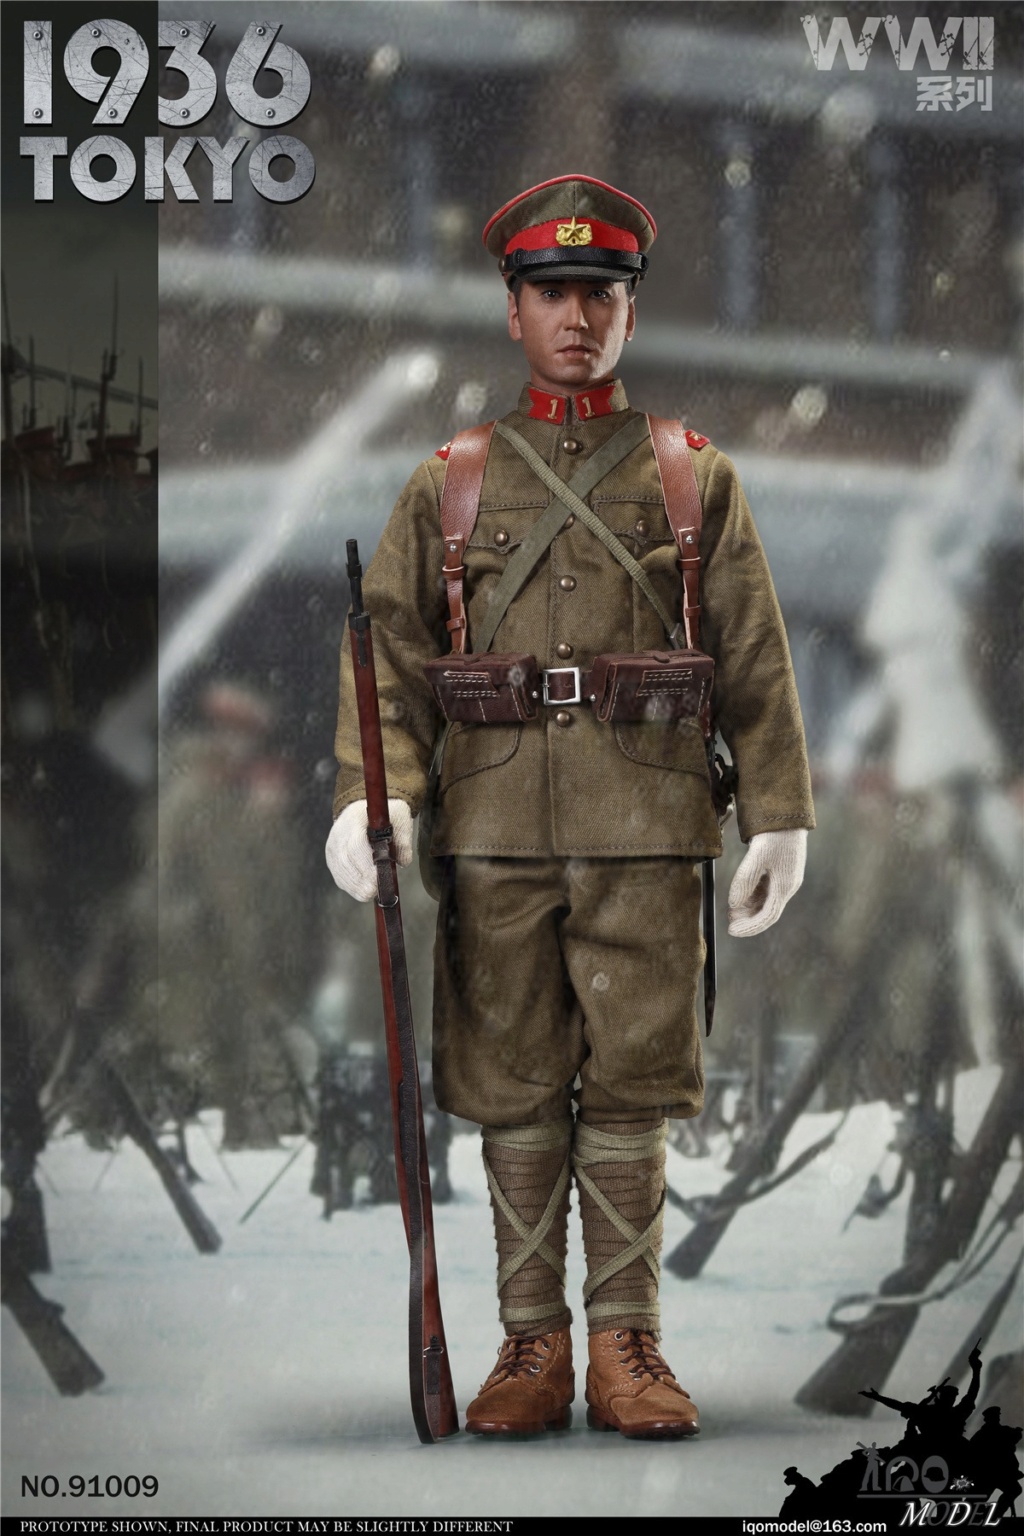 1936 - NEW PRODUCT: IQO Model: 1/6 WWII Series 1936 Tokyo (NO.91009) 15463711